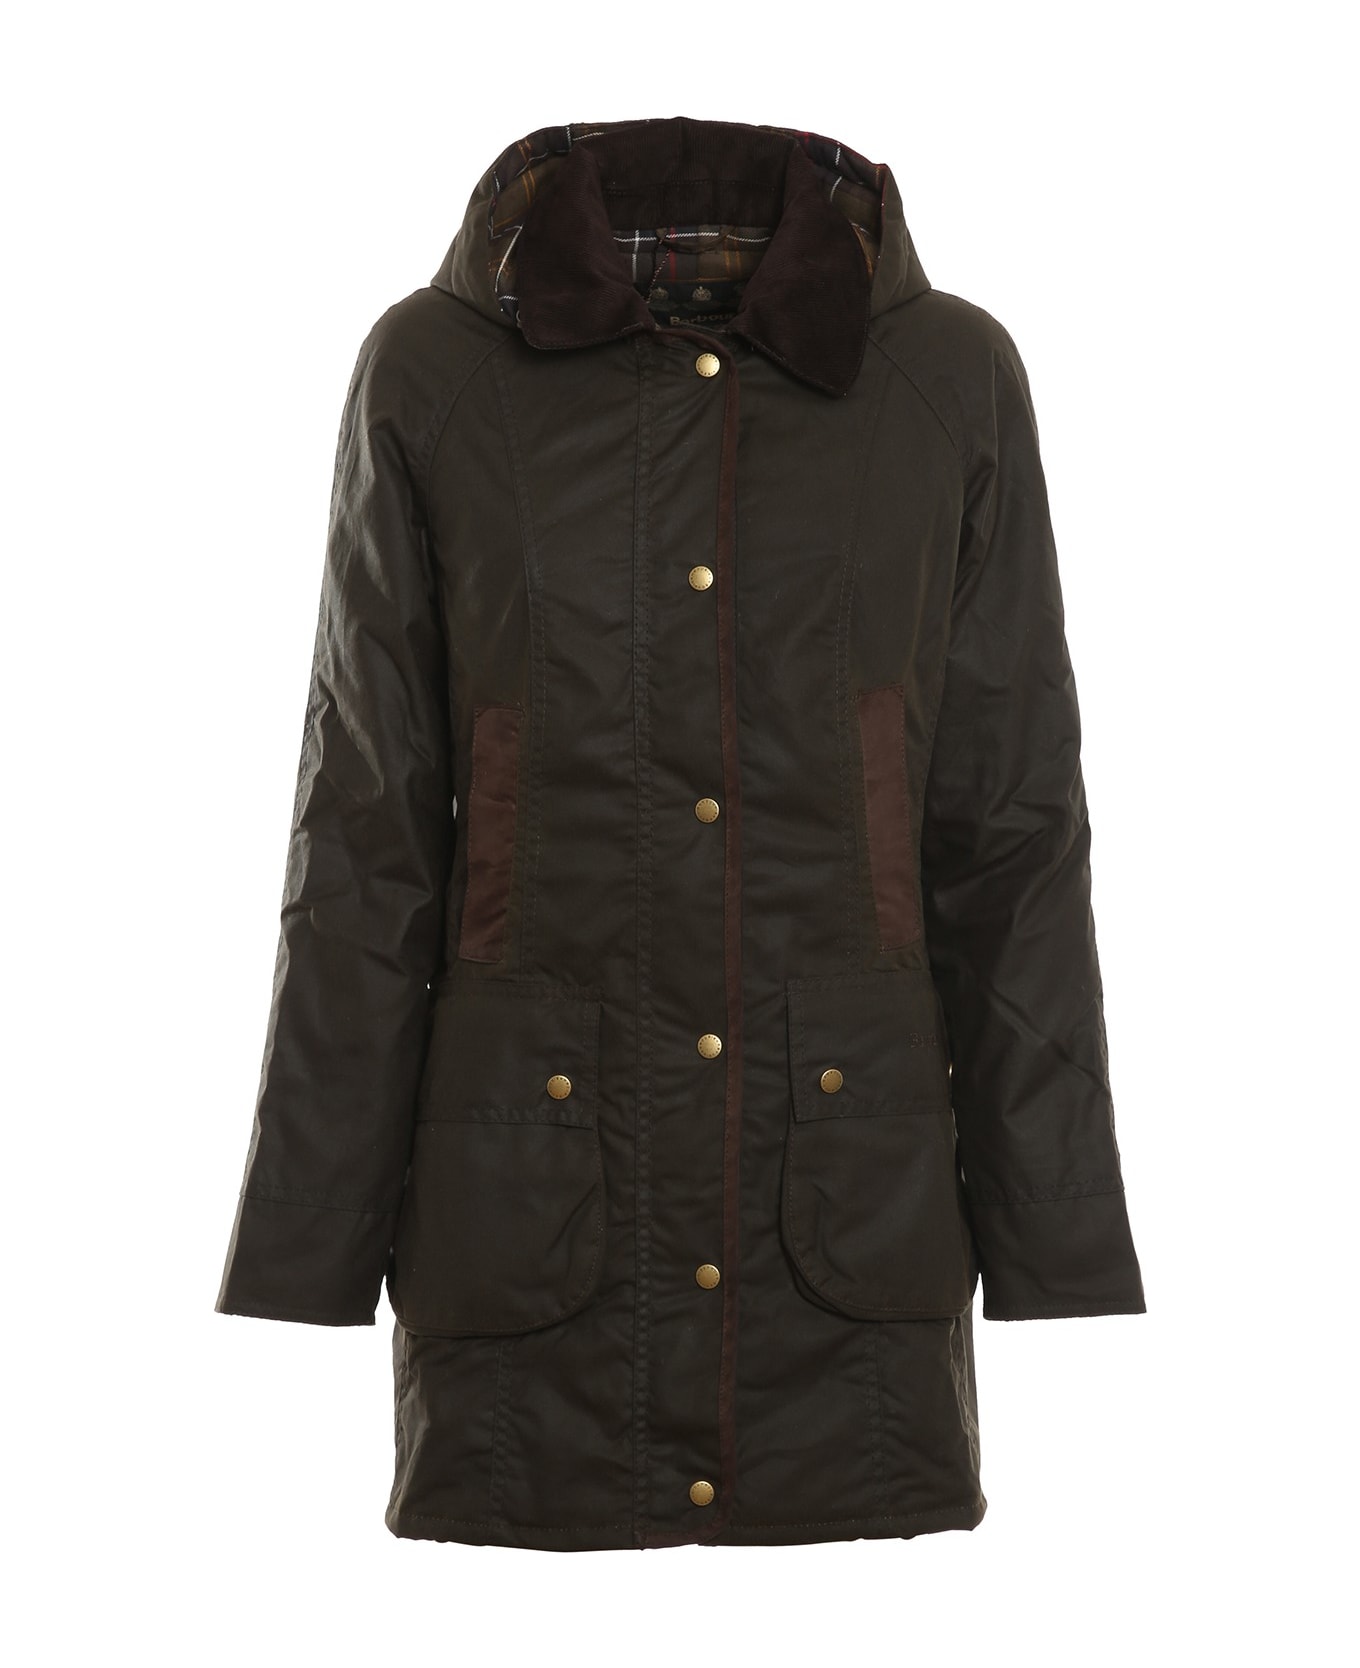 Barbour Bower Wax Jacket - Olive Classic